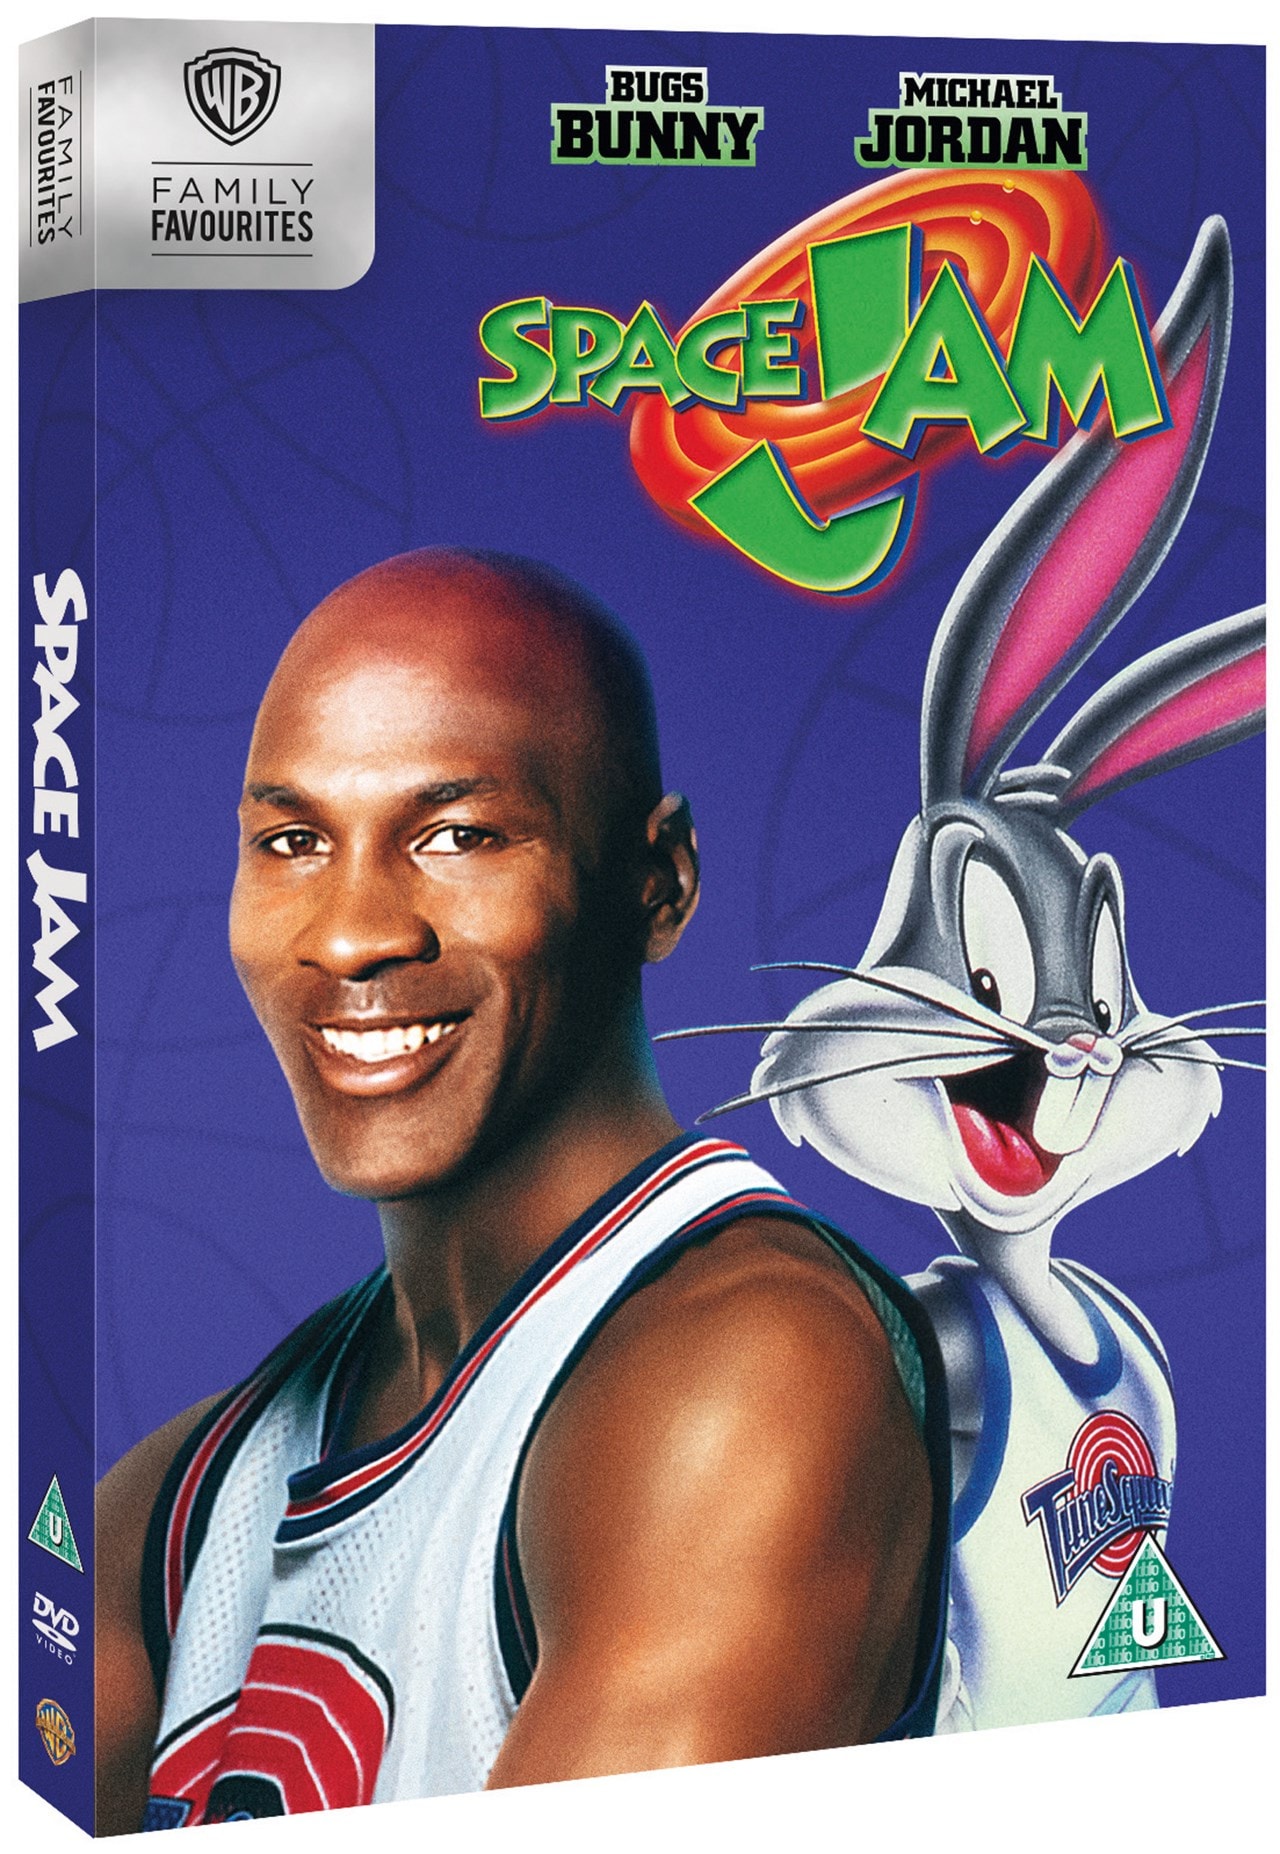 Space Jam | DVD | Free shipping over £20 | HMV Store